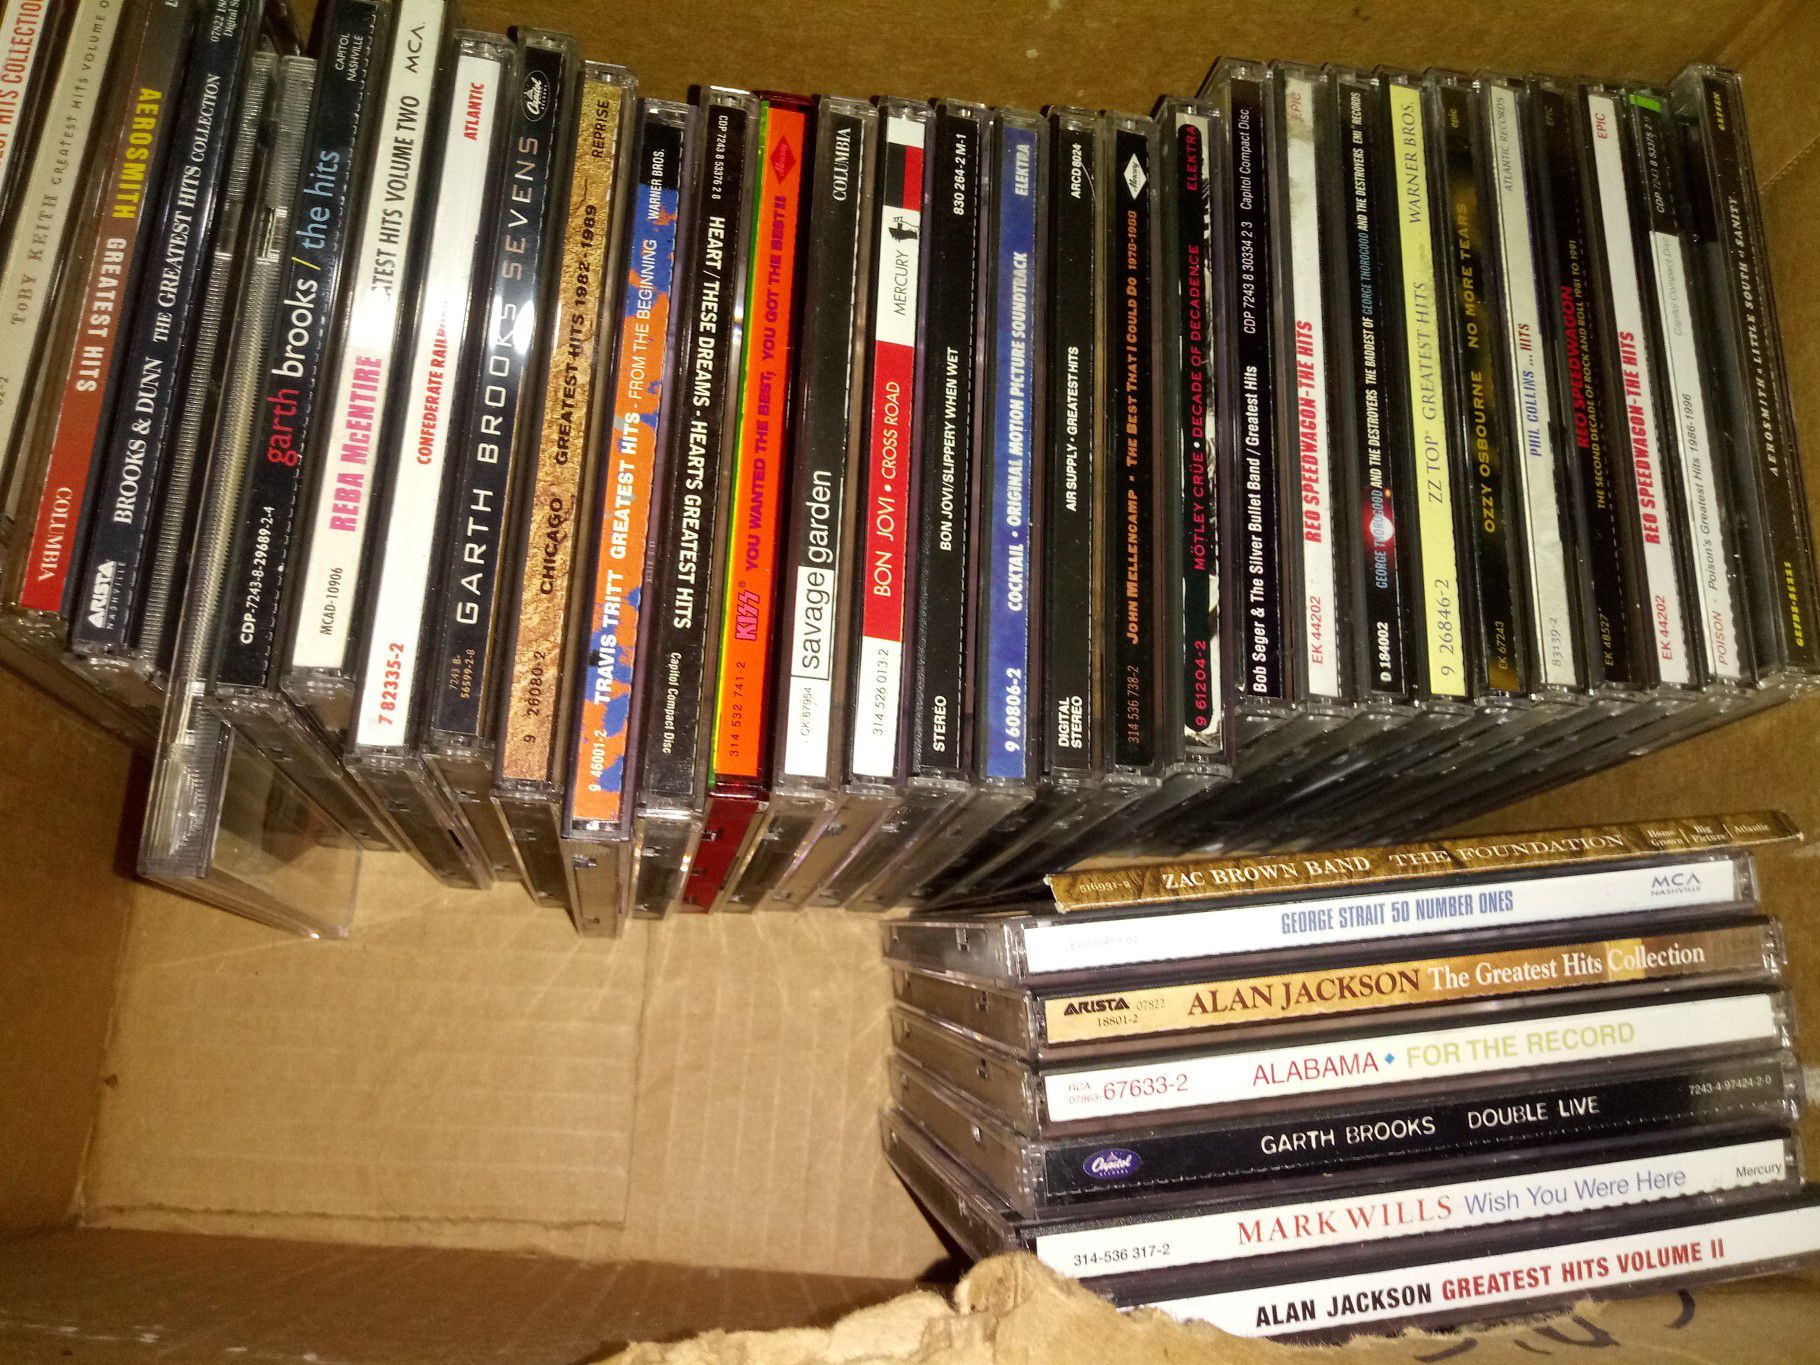 37 country and rock cds with 2 cases